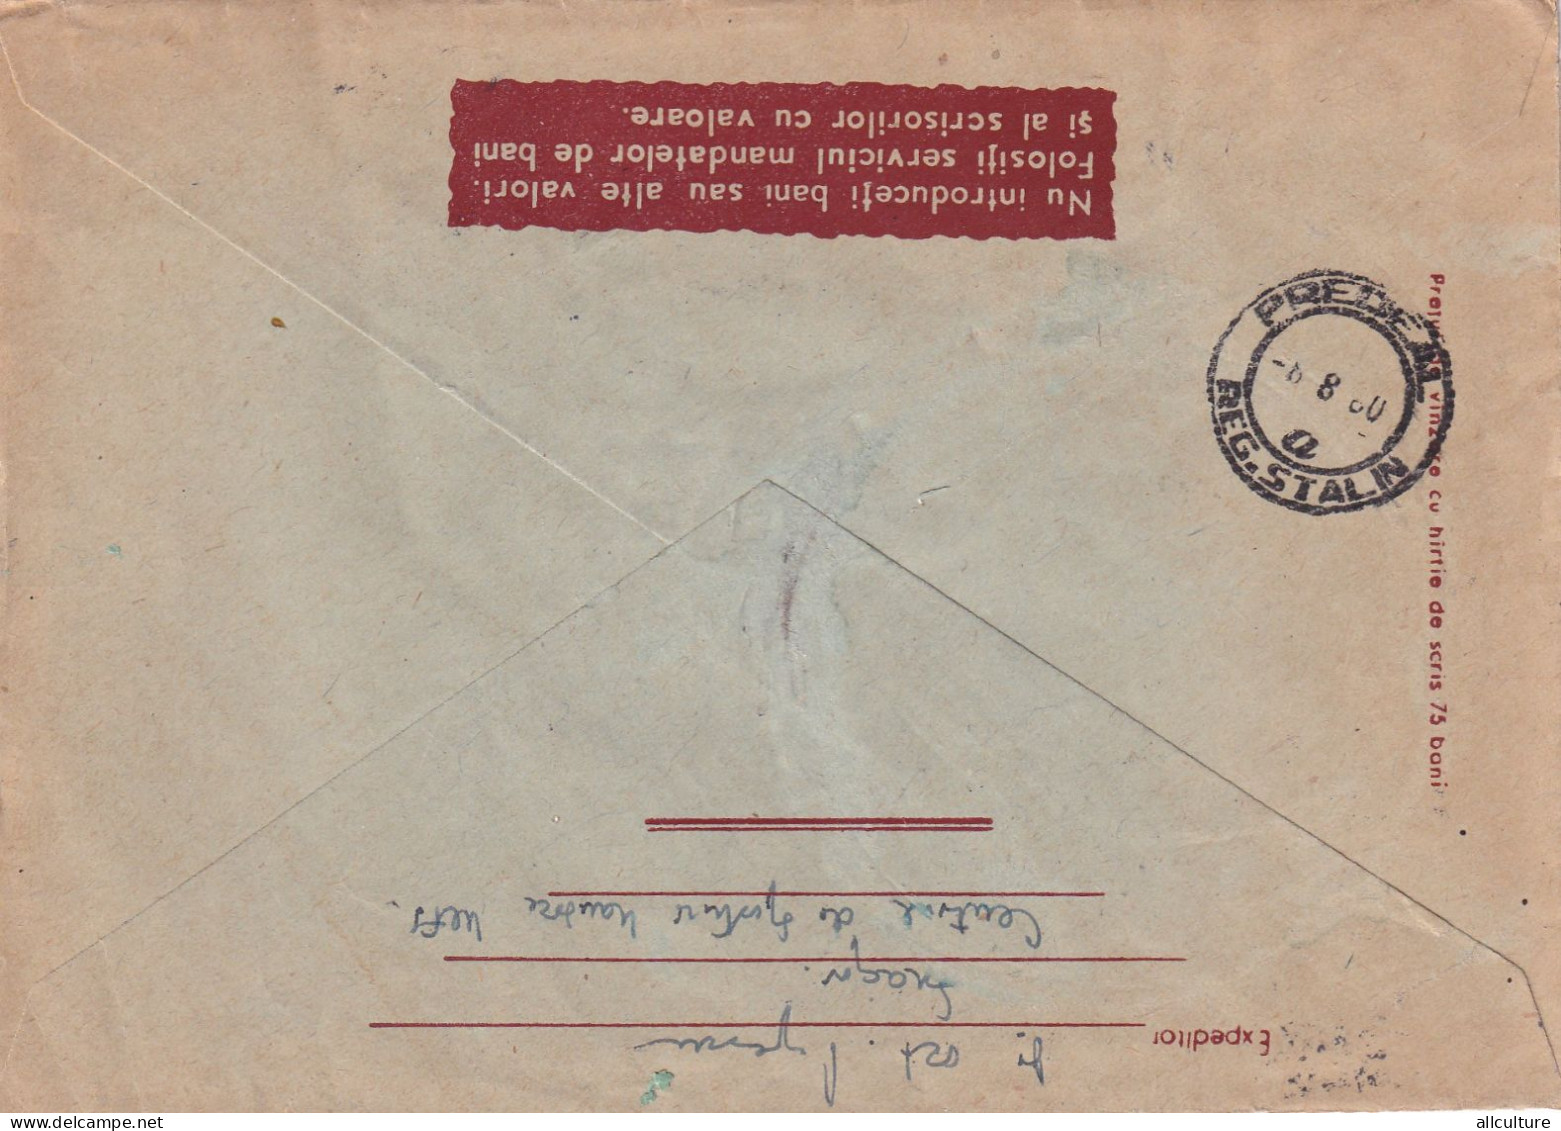 A24612 - PRONOEXPRES  LUCK GAME  LOTTO, VAGER, PETING, COVER STATIONERY,  1960  Romania - Enteros Postales